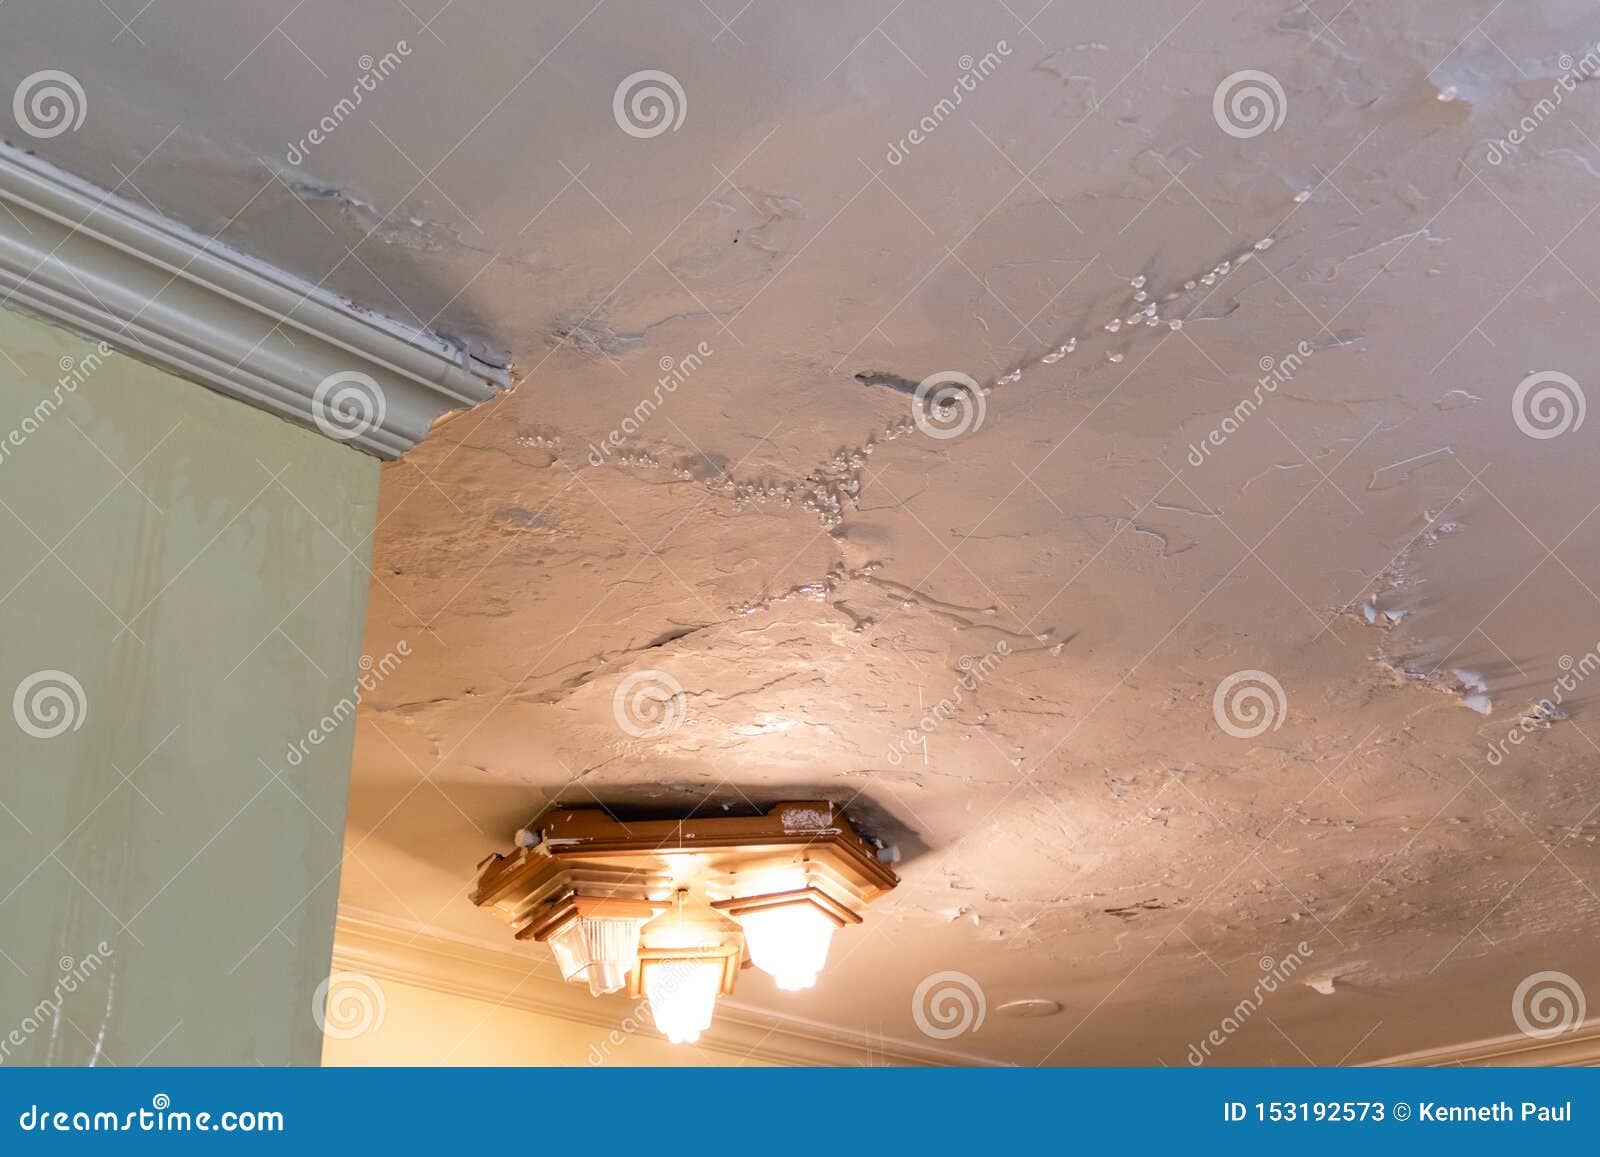 Water Dripping From Leaking Ceiling Stock Image Image Of